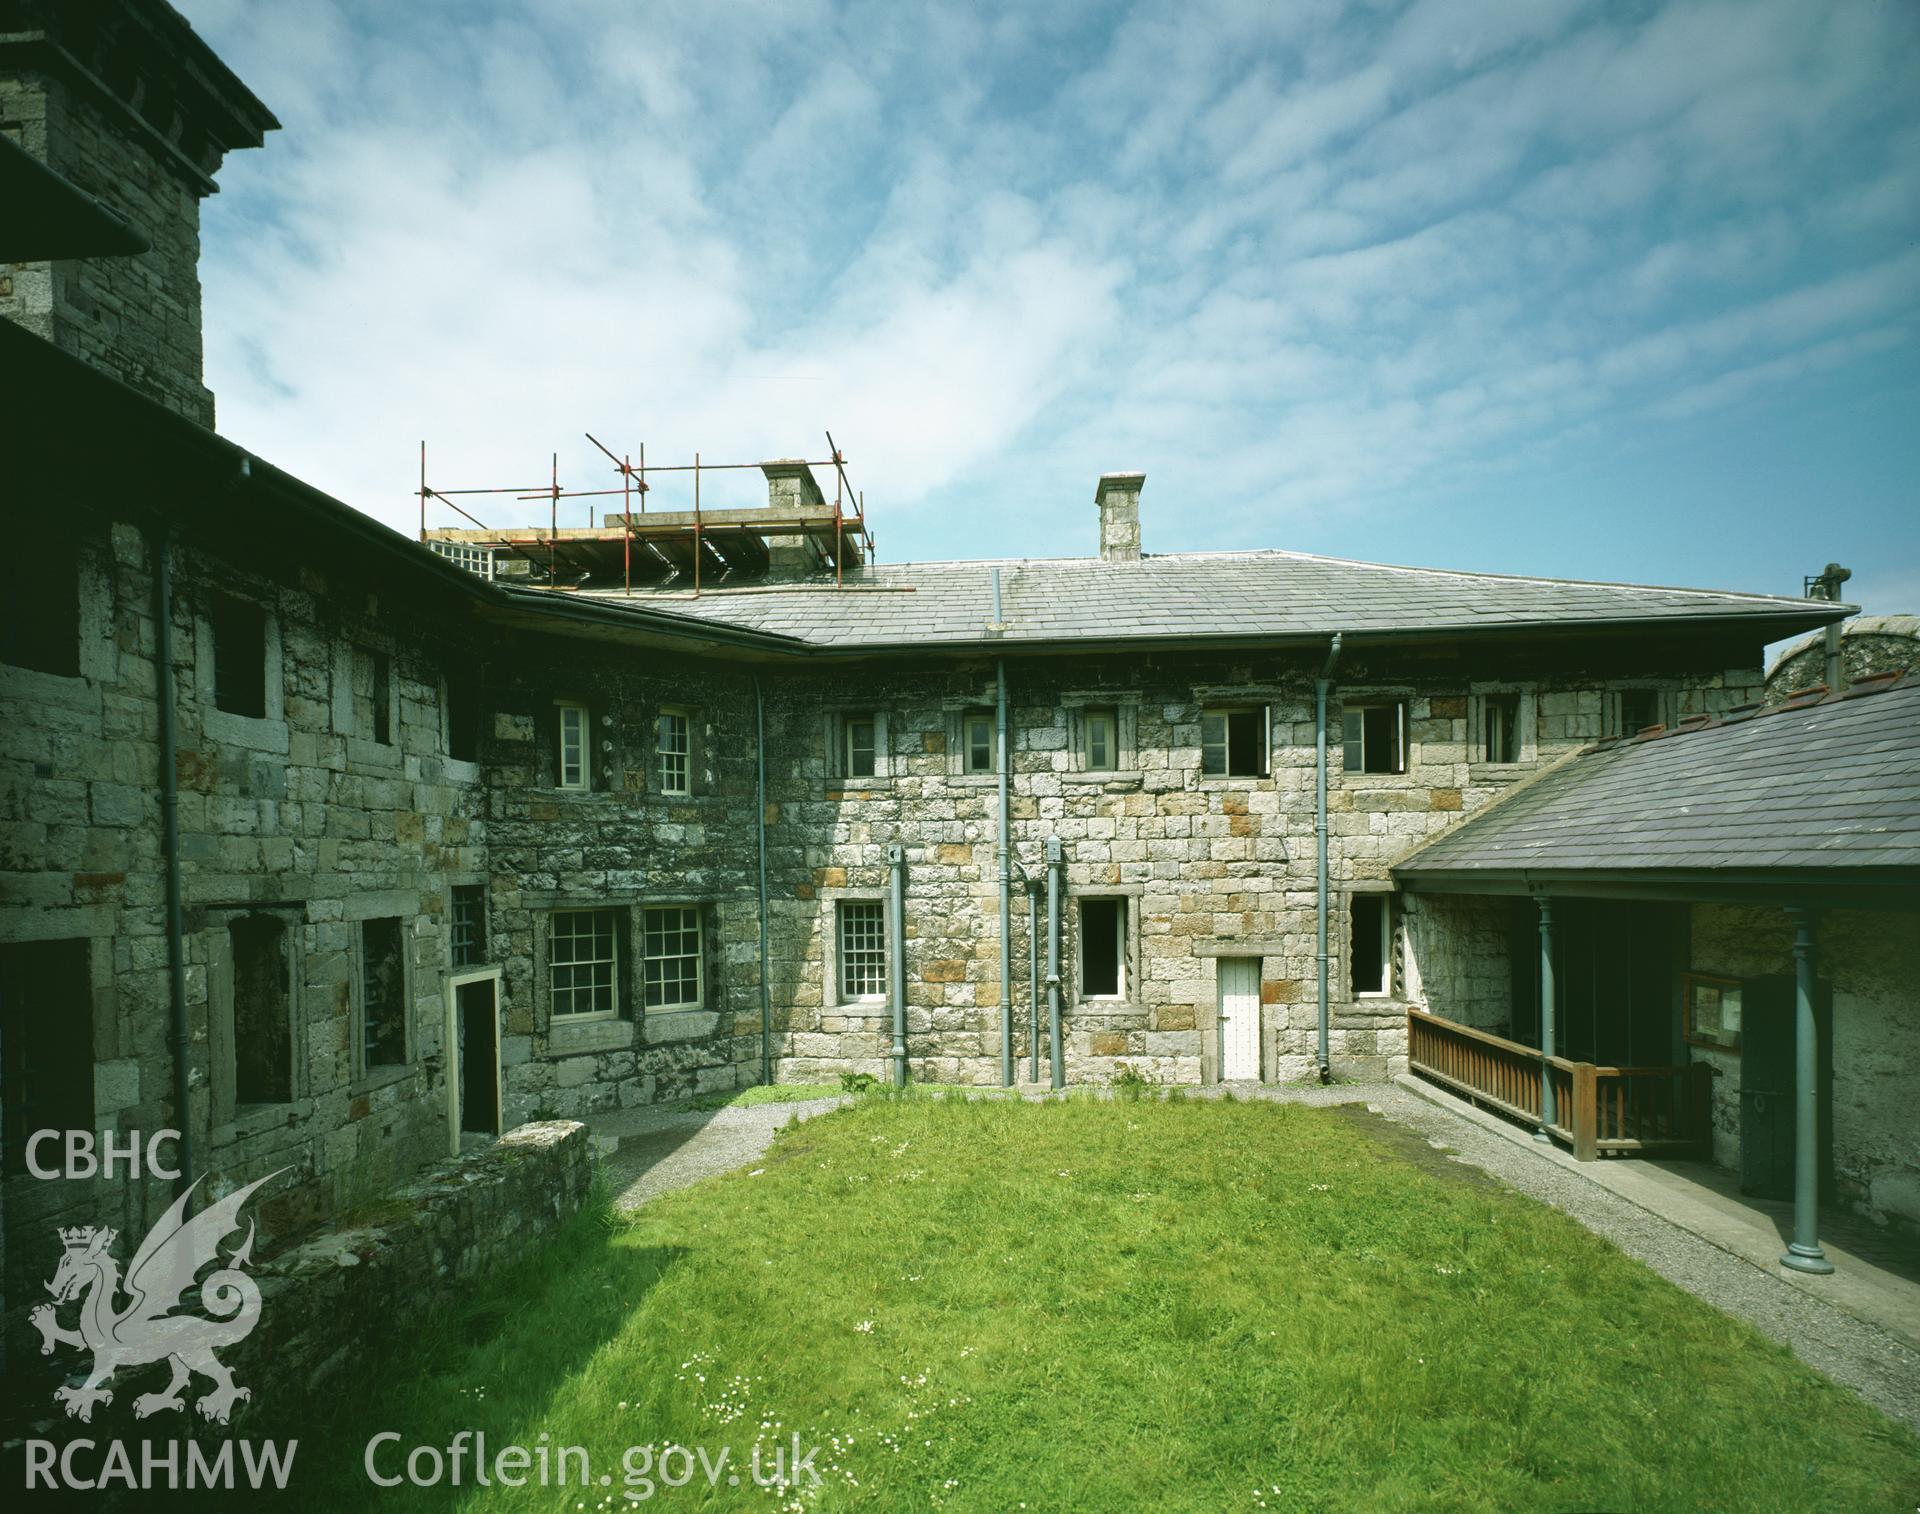 RCAHMW colour transparency showing Beaumaris Gaol taken by I.N. Wright, 1979